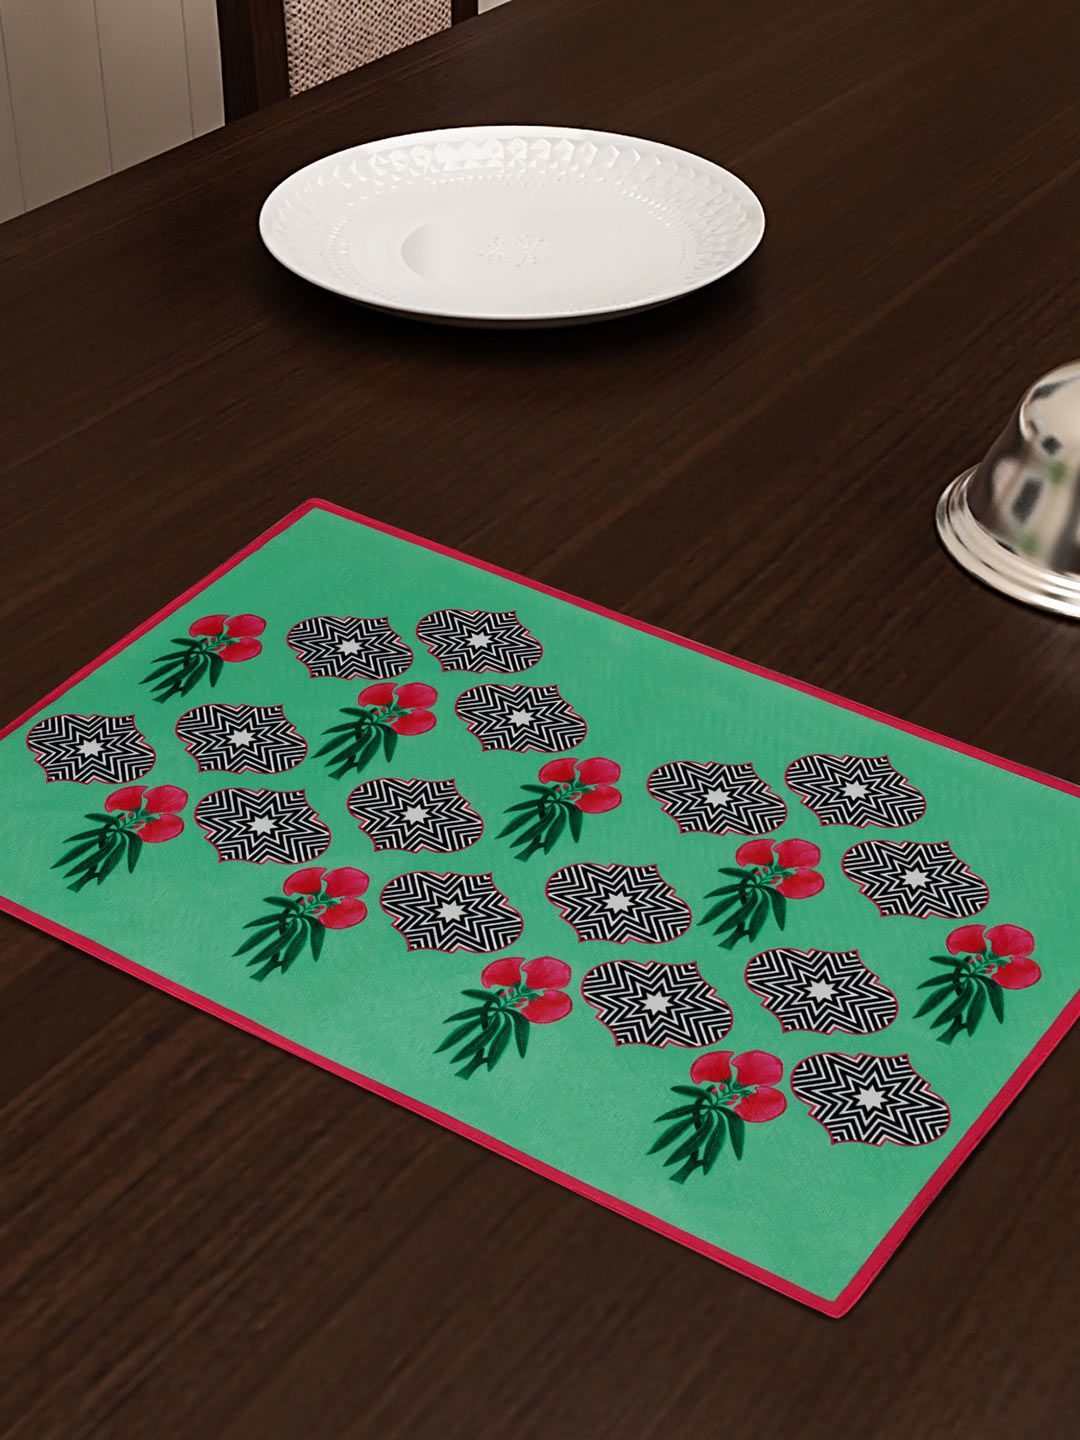 SEJ by Nisha Gupta Green Set of 6 Printed Table Placemats Price in India